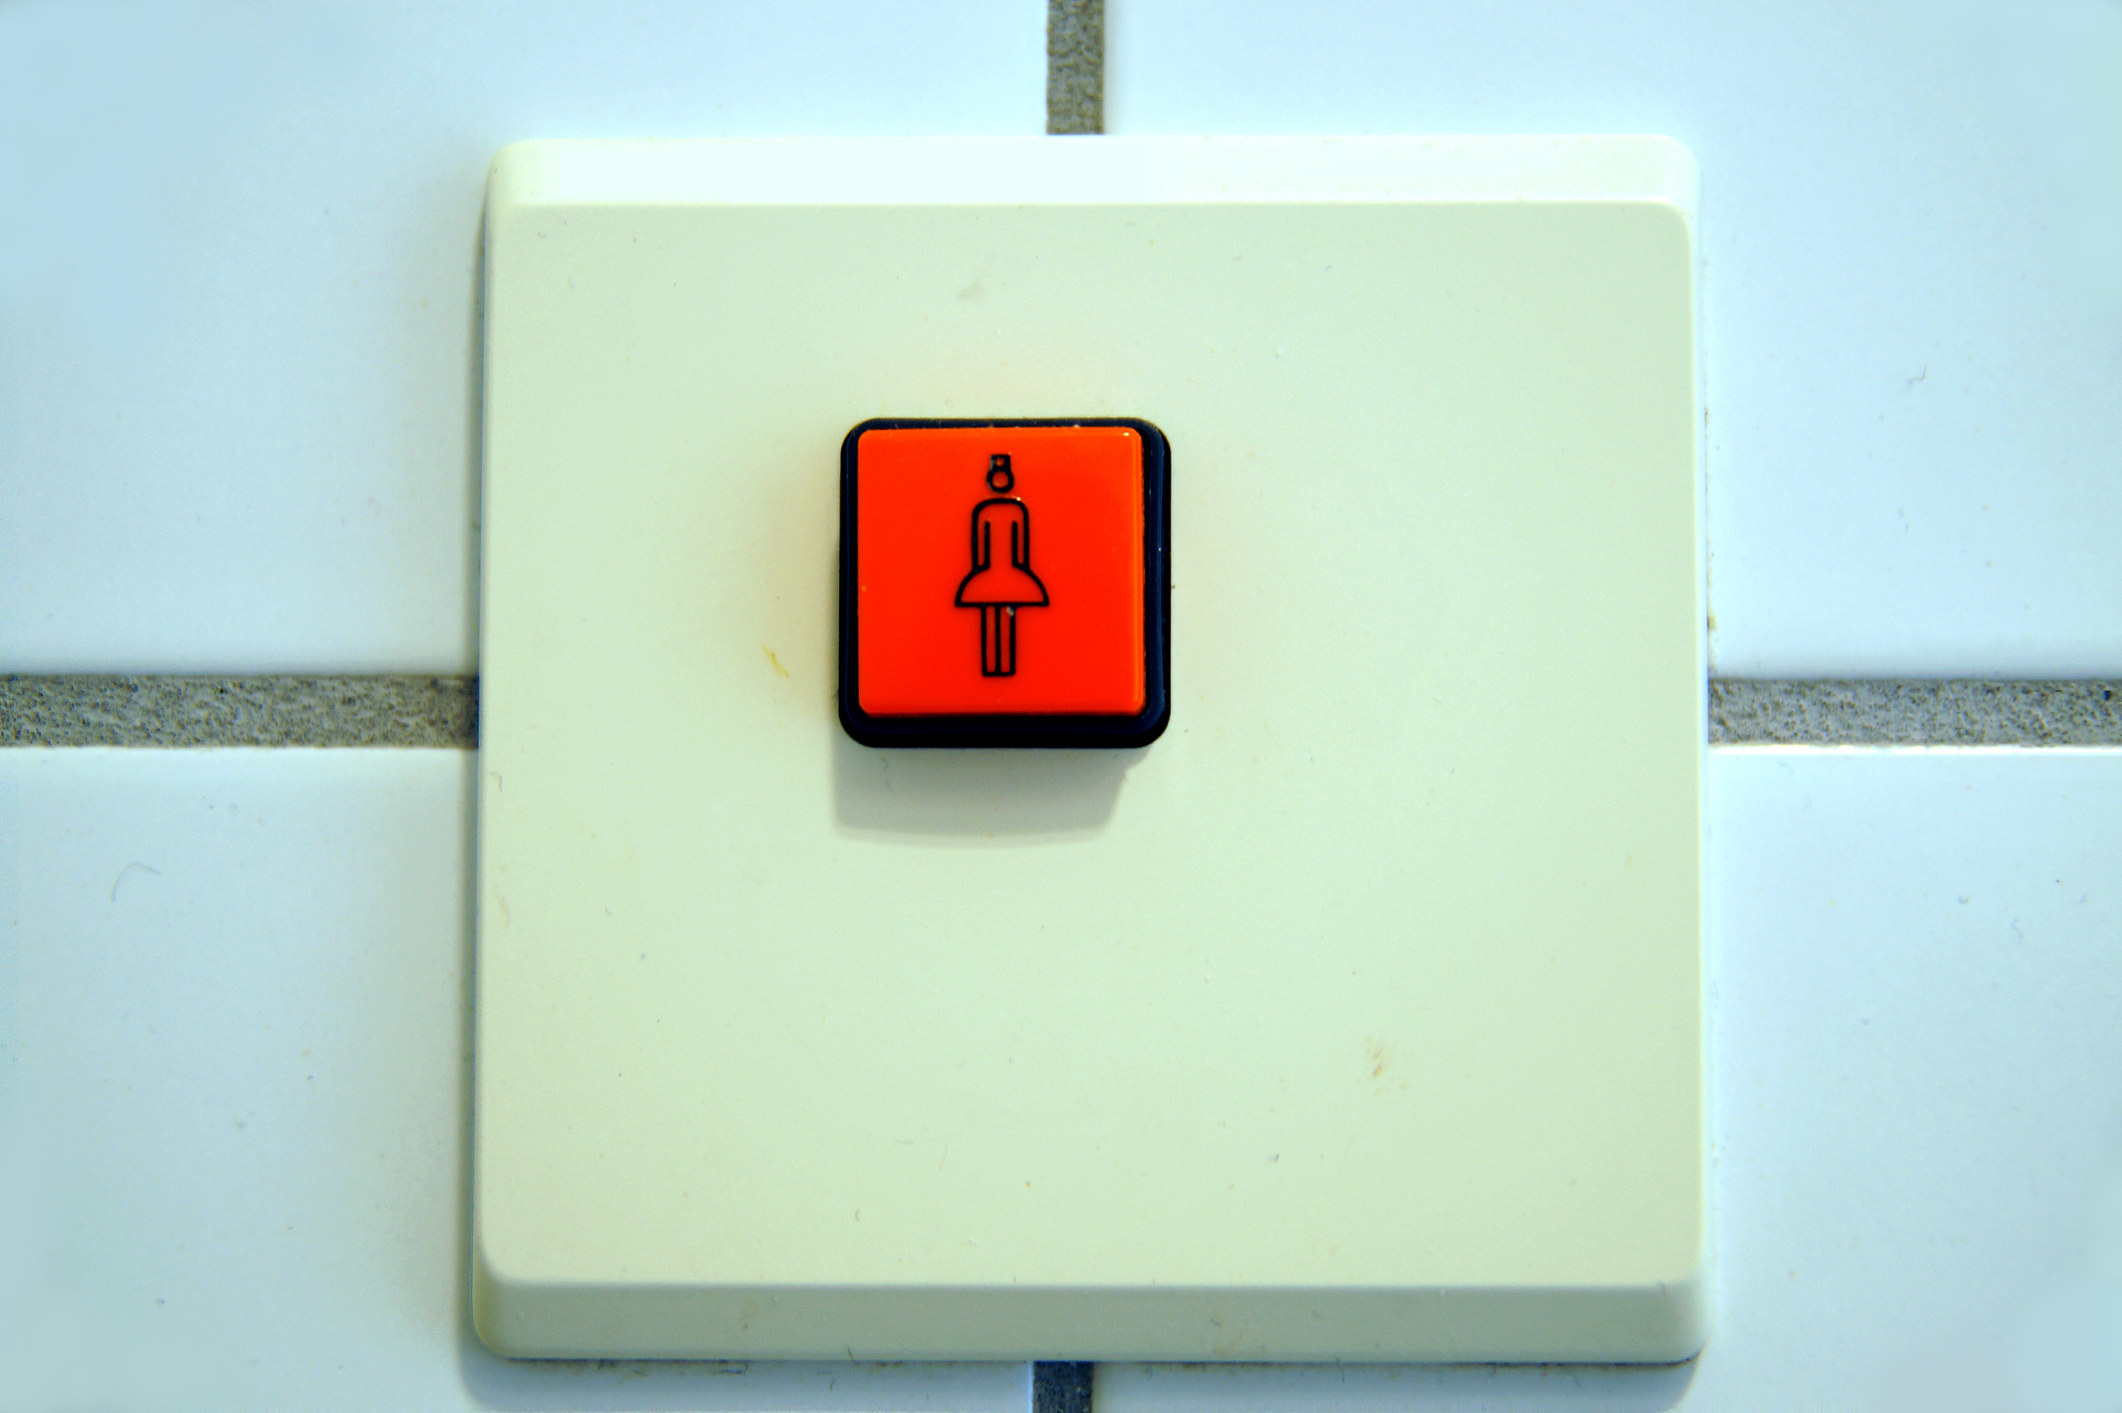 Nurse call button in the bathroom in a nursing home in old condition